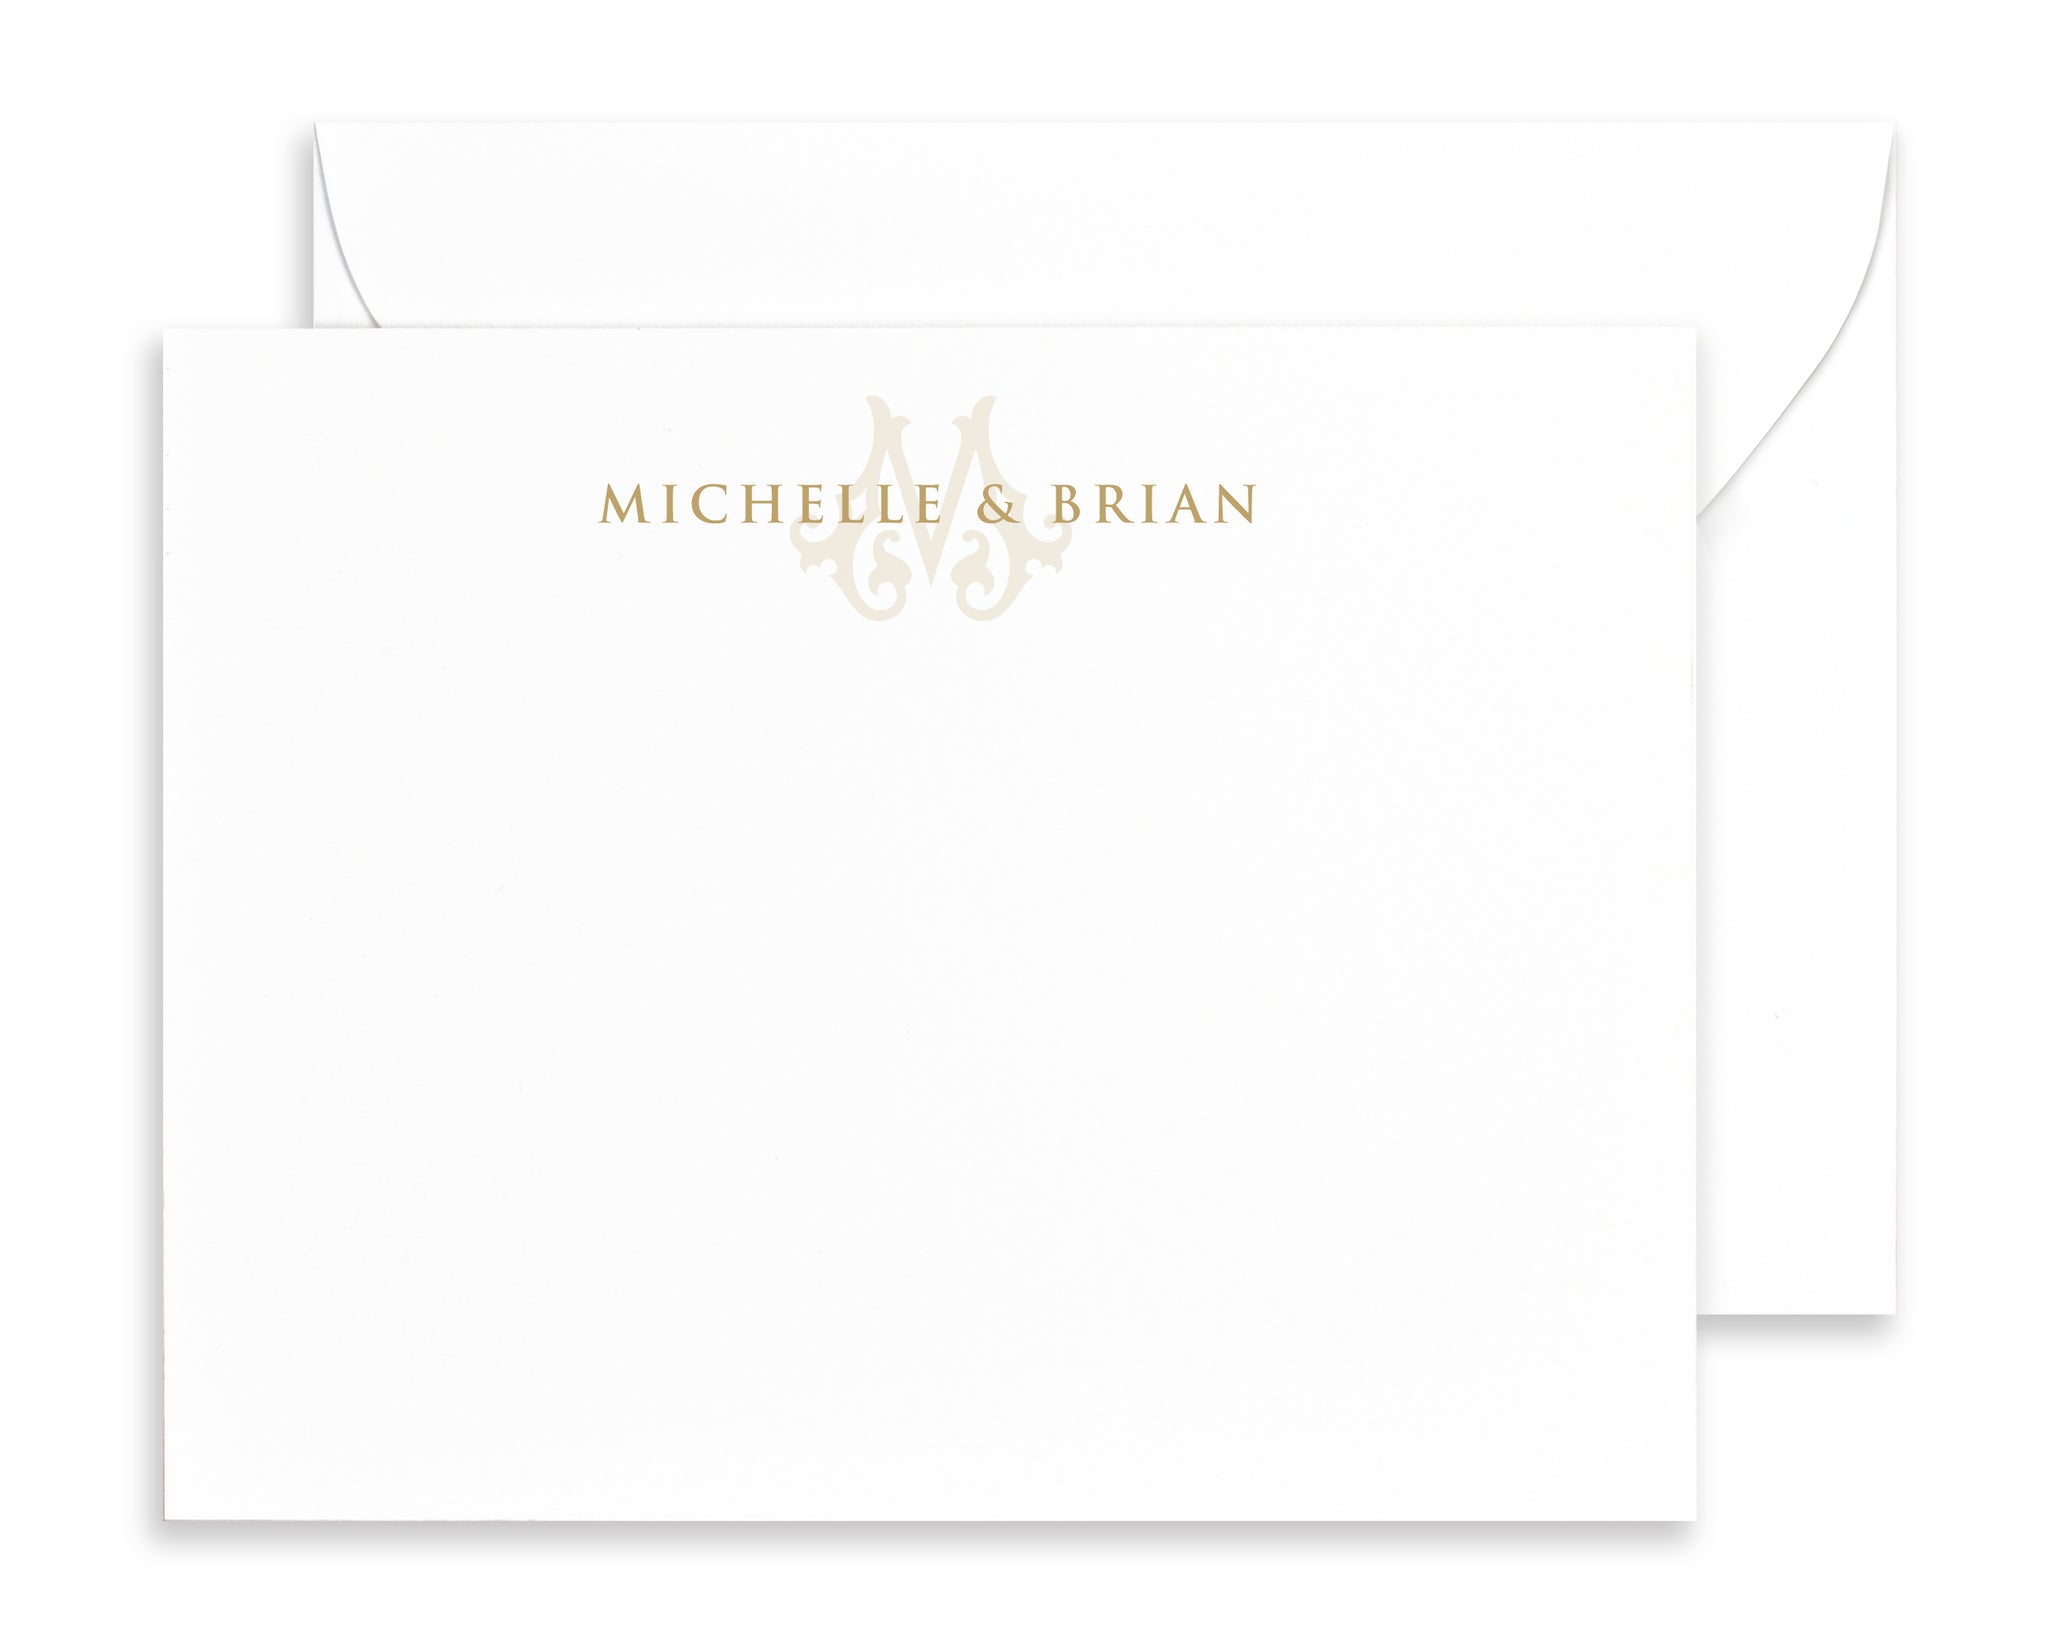 Personalized Note Cards & Stationery